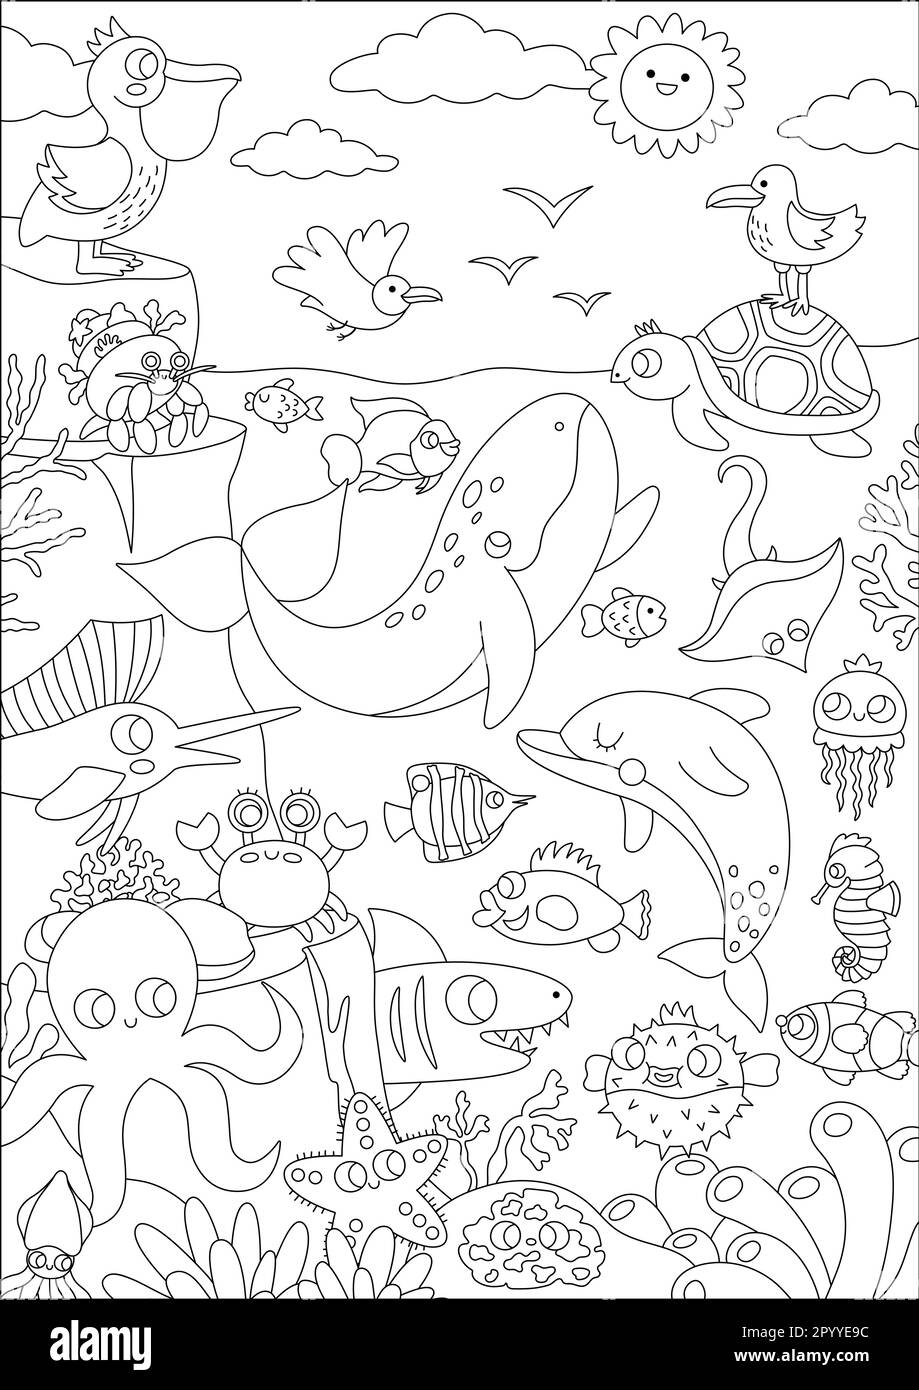 Vector black and white under the sea landscape illustration with rock slope. Ocean life line scene with animals, dolphin, whale, seagull, pelican. Ver Stock Vector